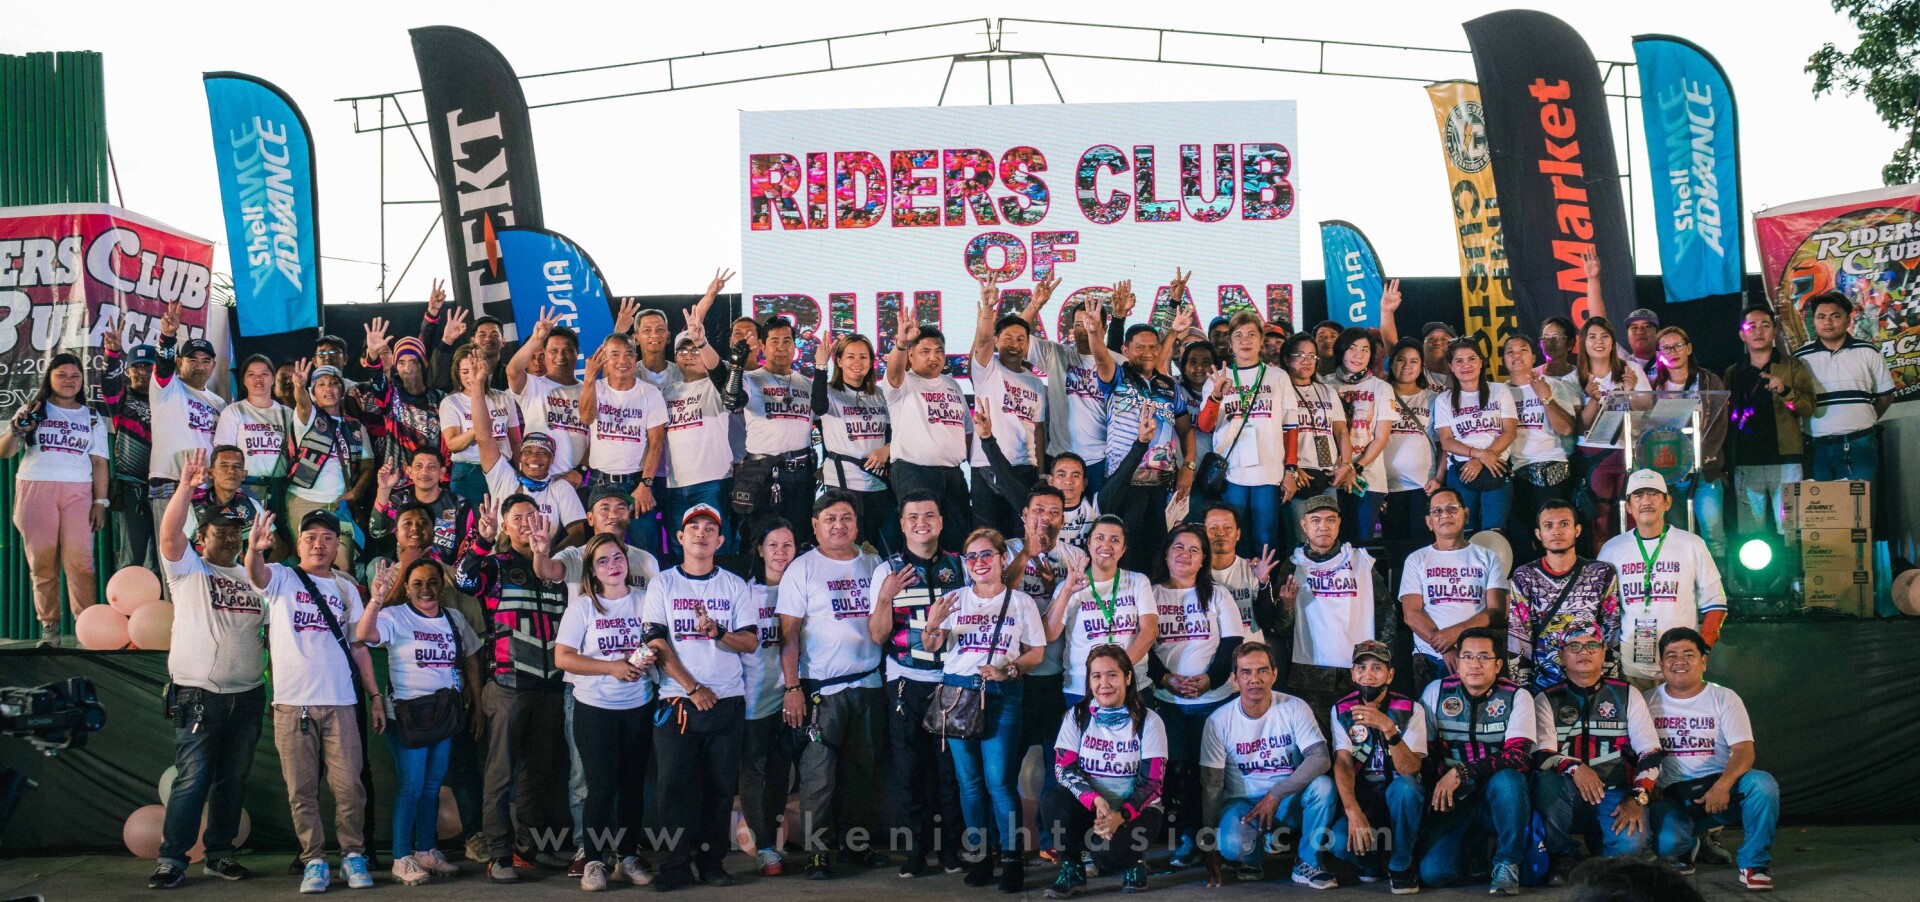 Bulacan Riders Convention: Tourism, Passion and a Celebration of Riders Club of Bulacan's Third Year Anniversary